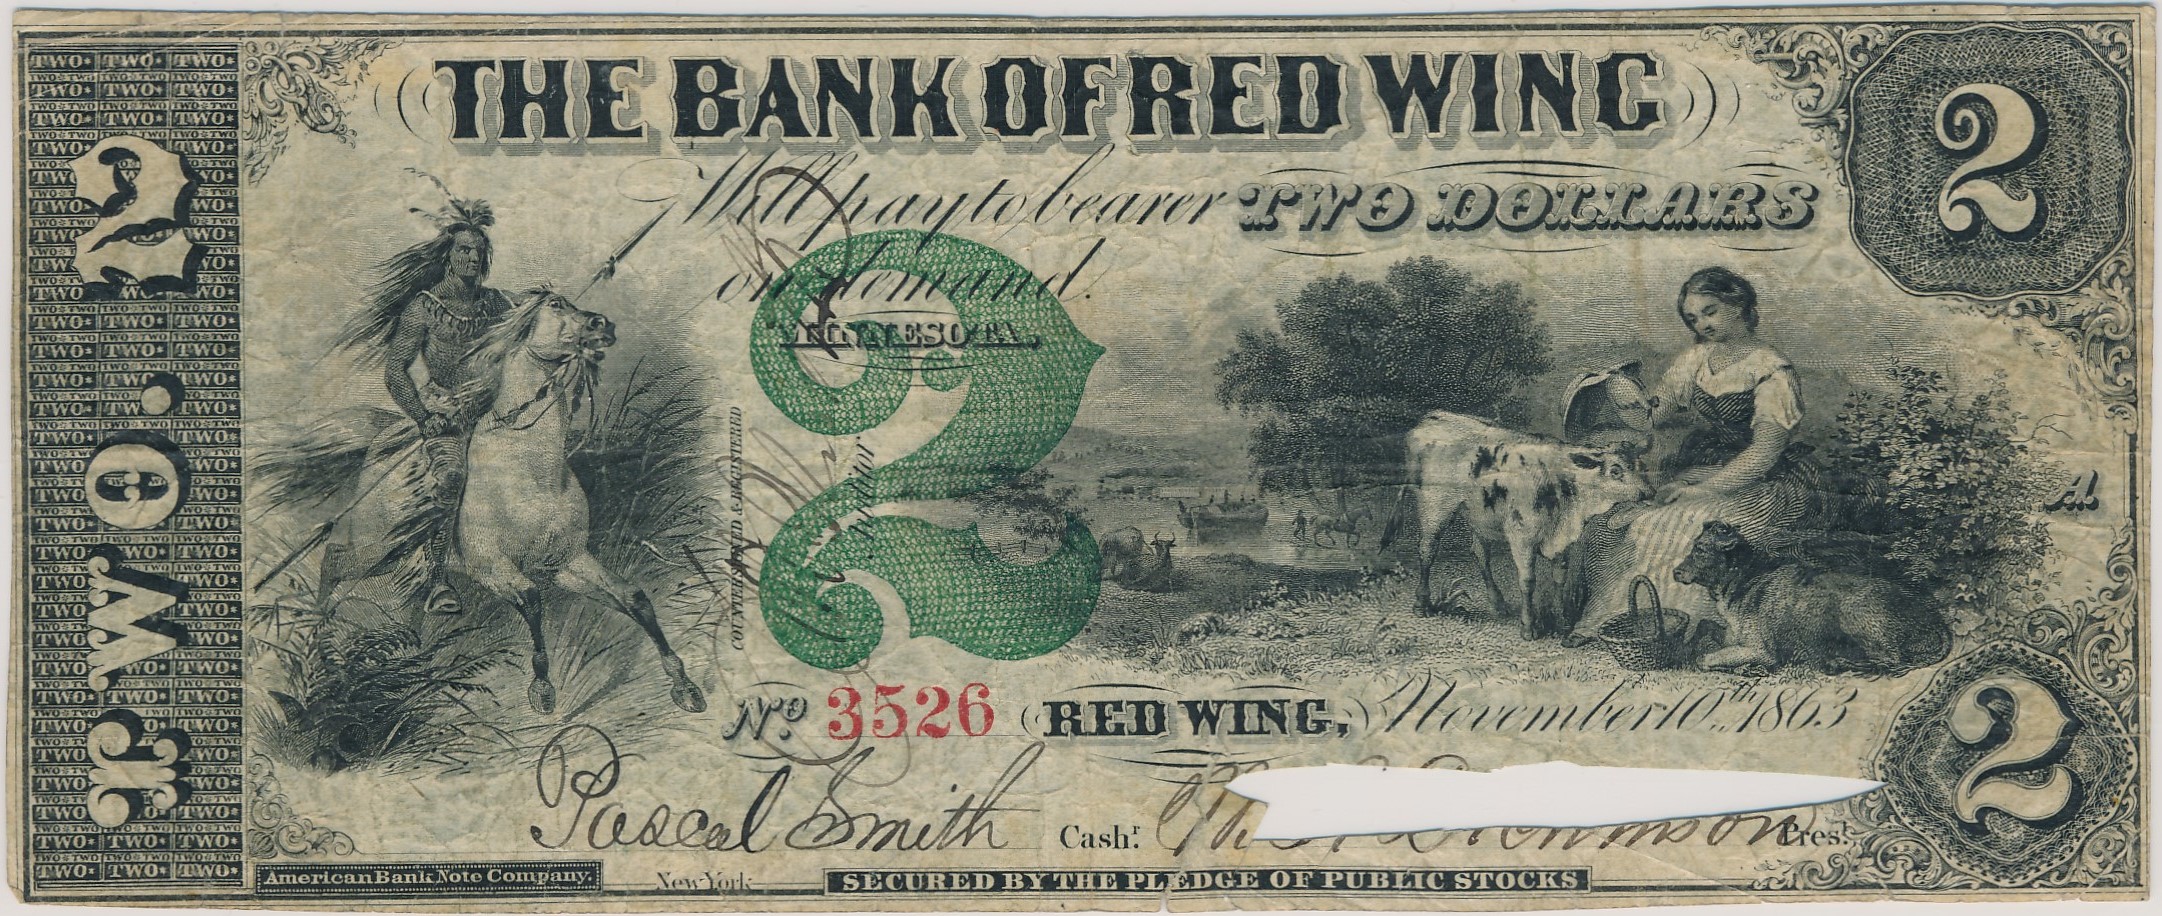 $2 Bank of Red Wing (2nd)